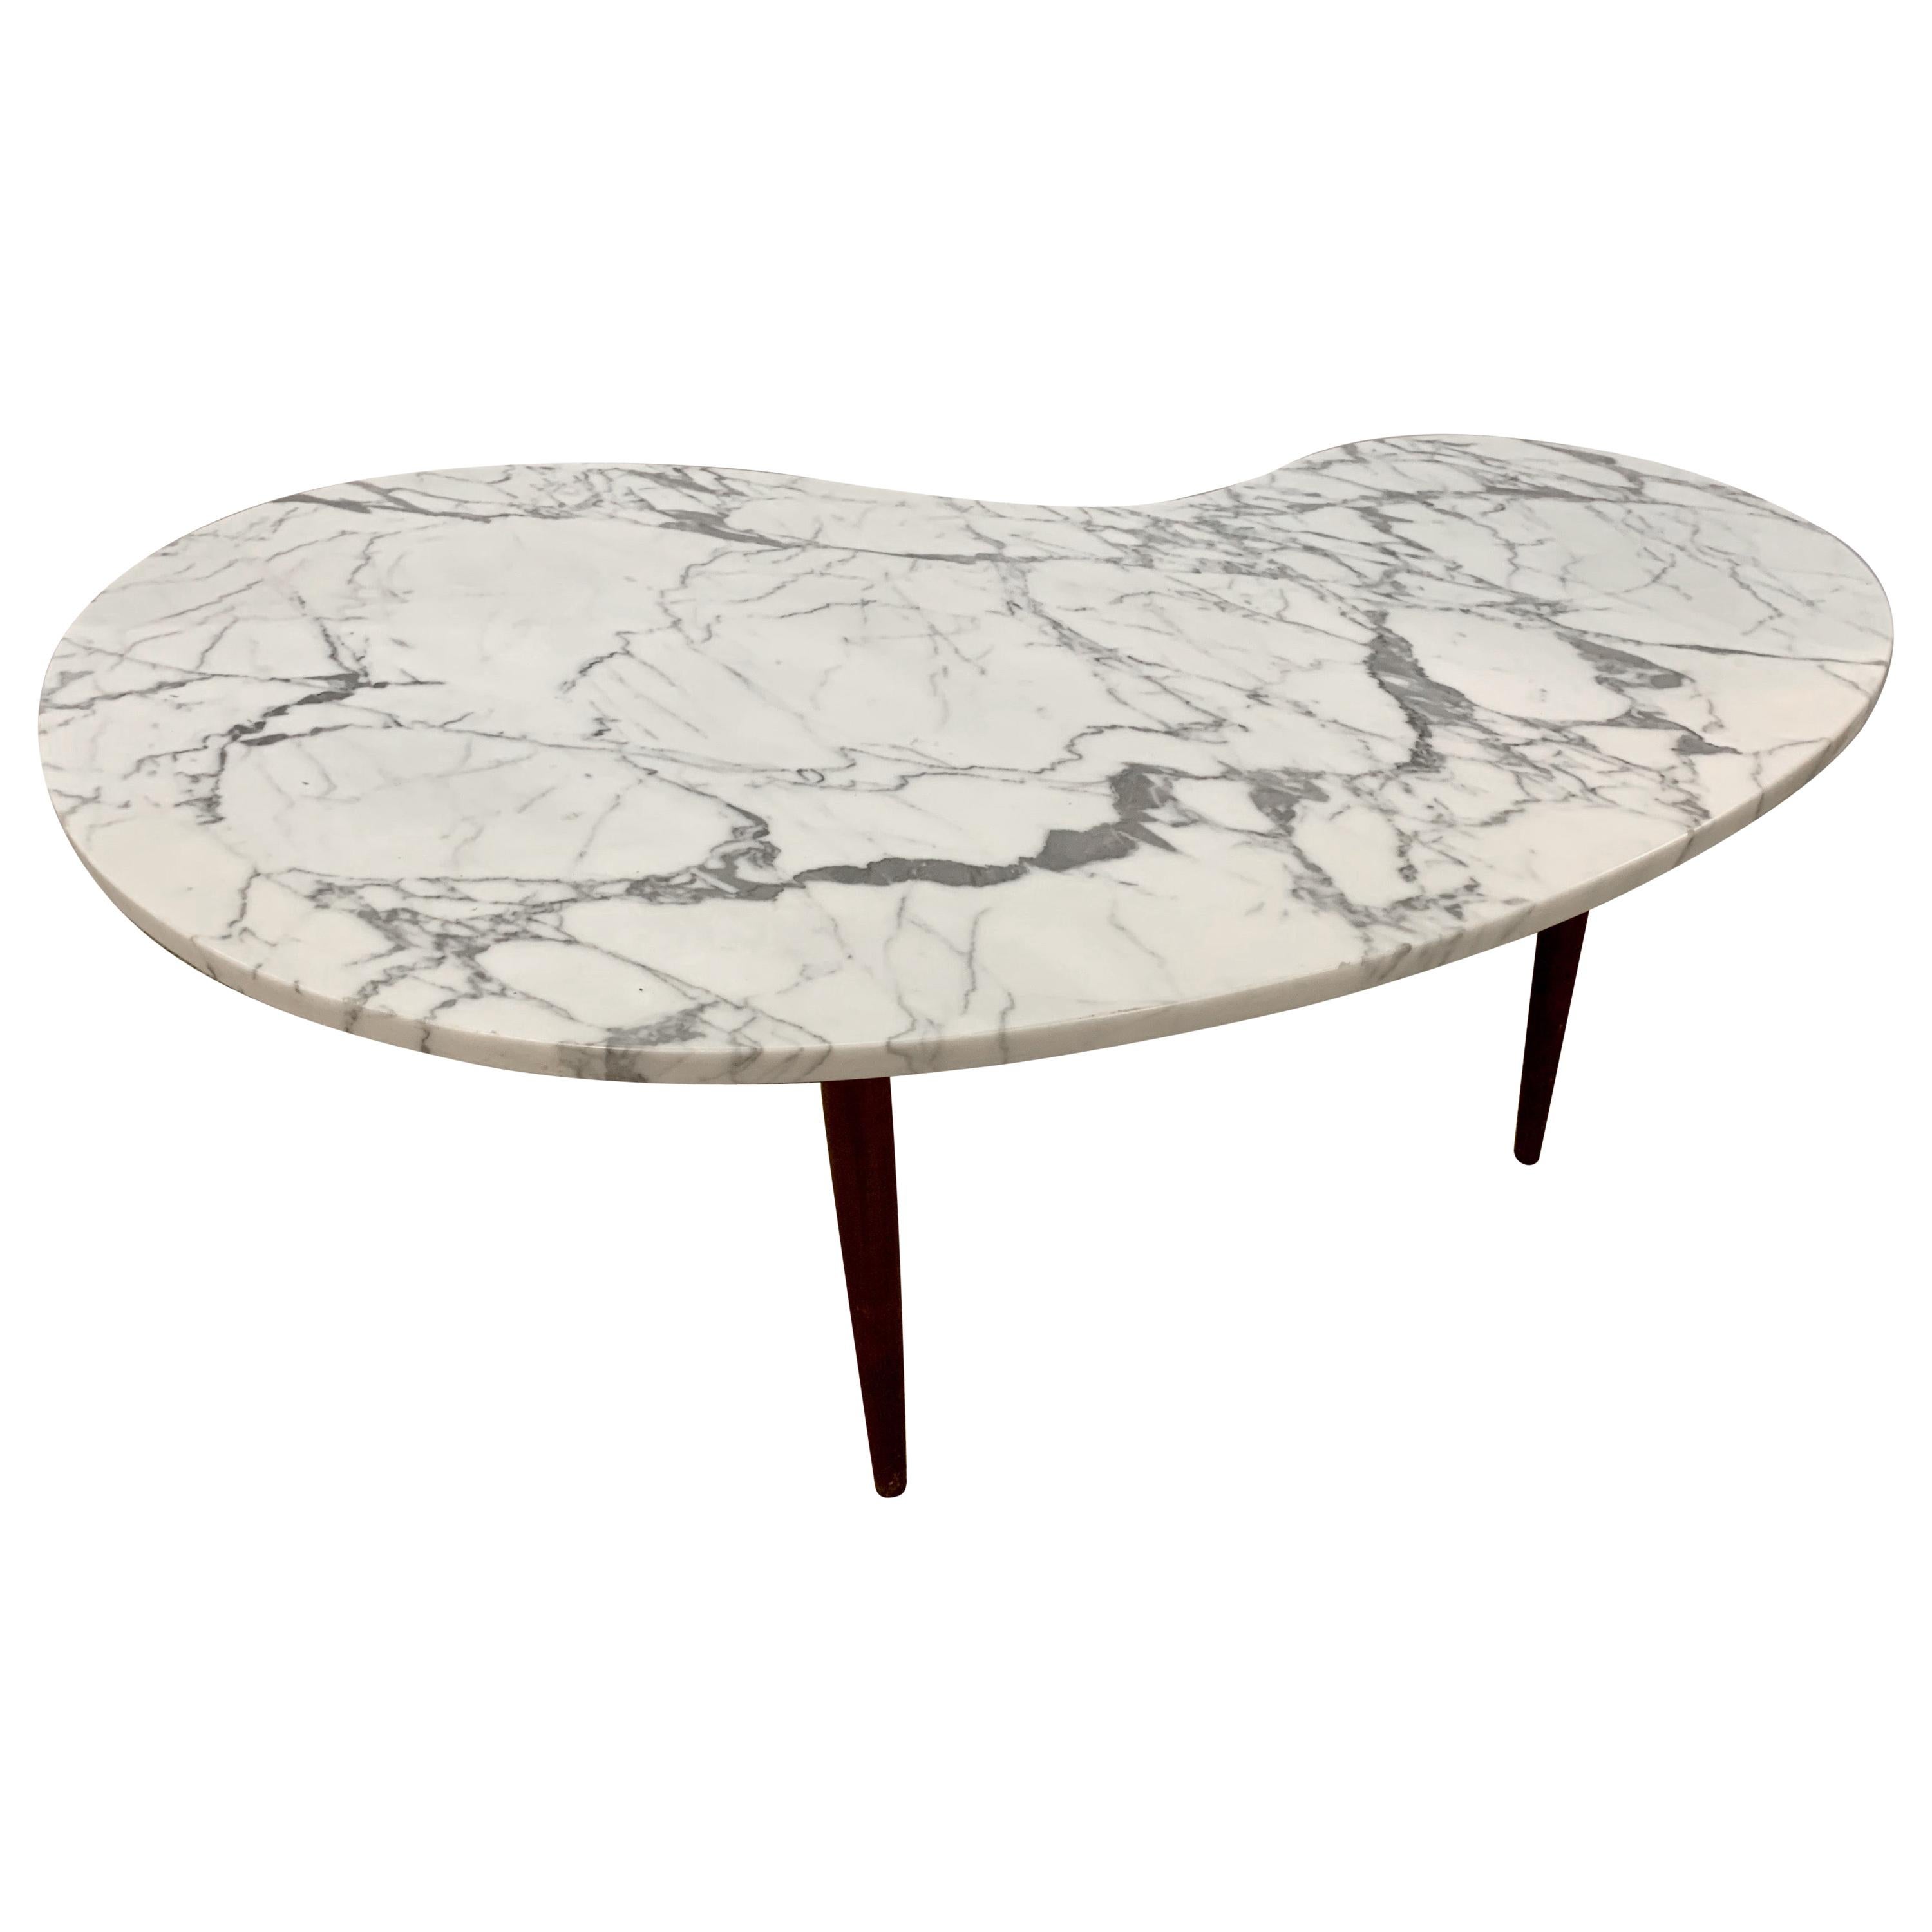 Mid-Century Modern Kidney Shape Marble Top Coffee Cocktail Table